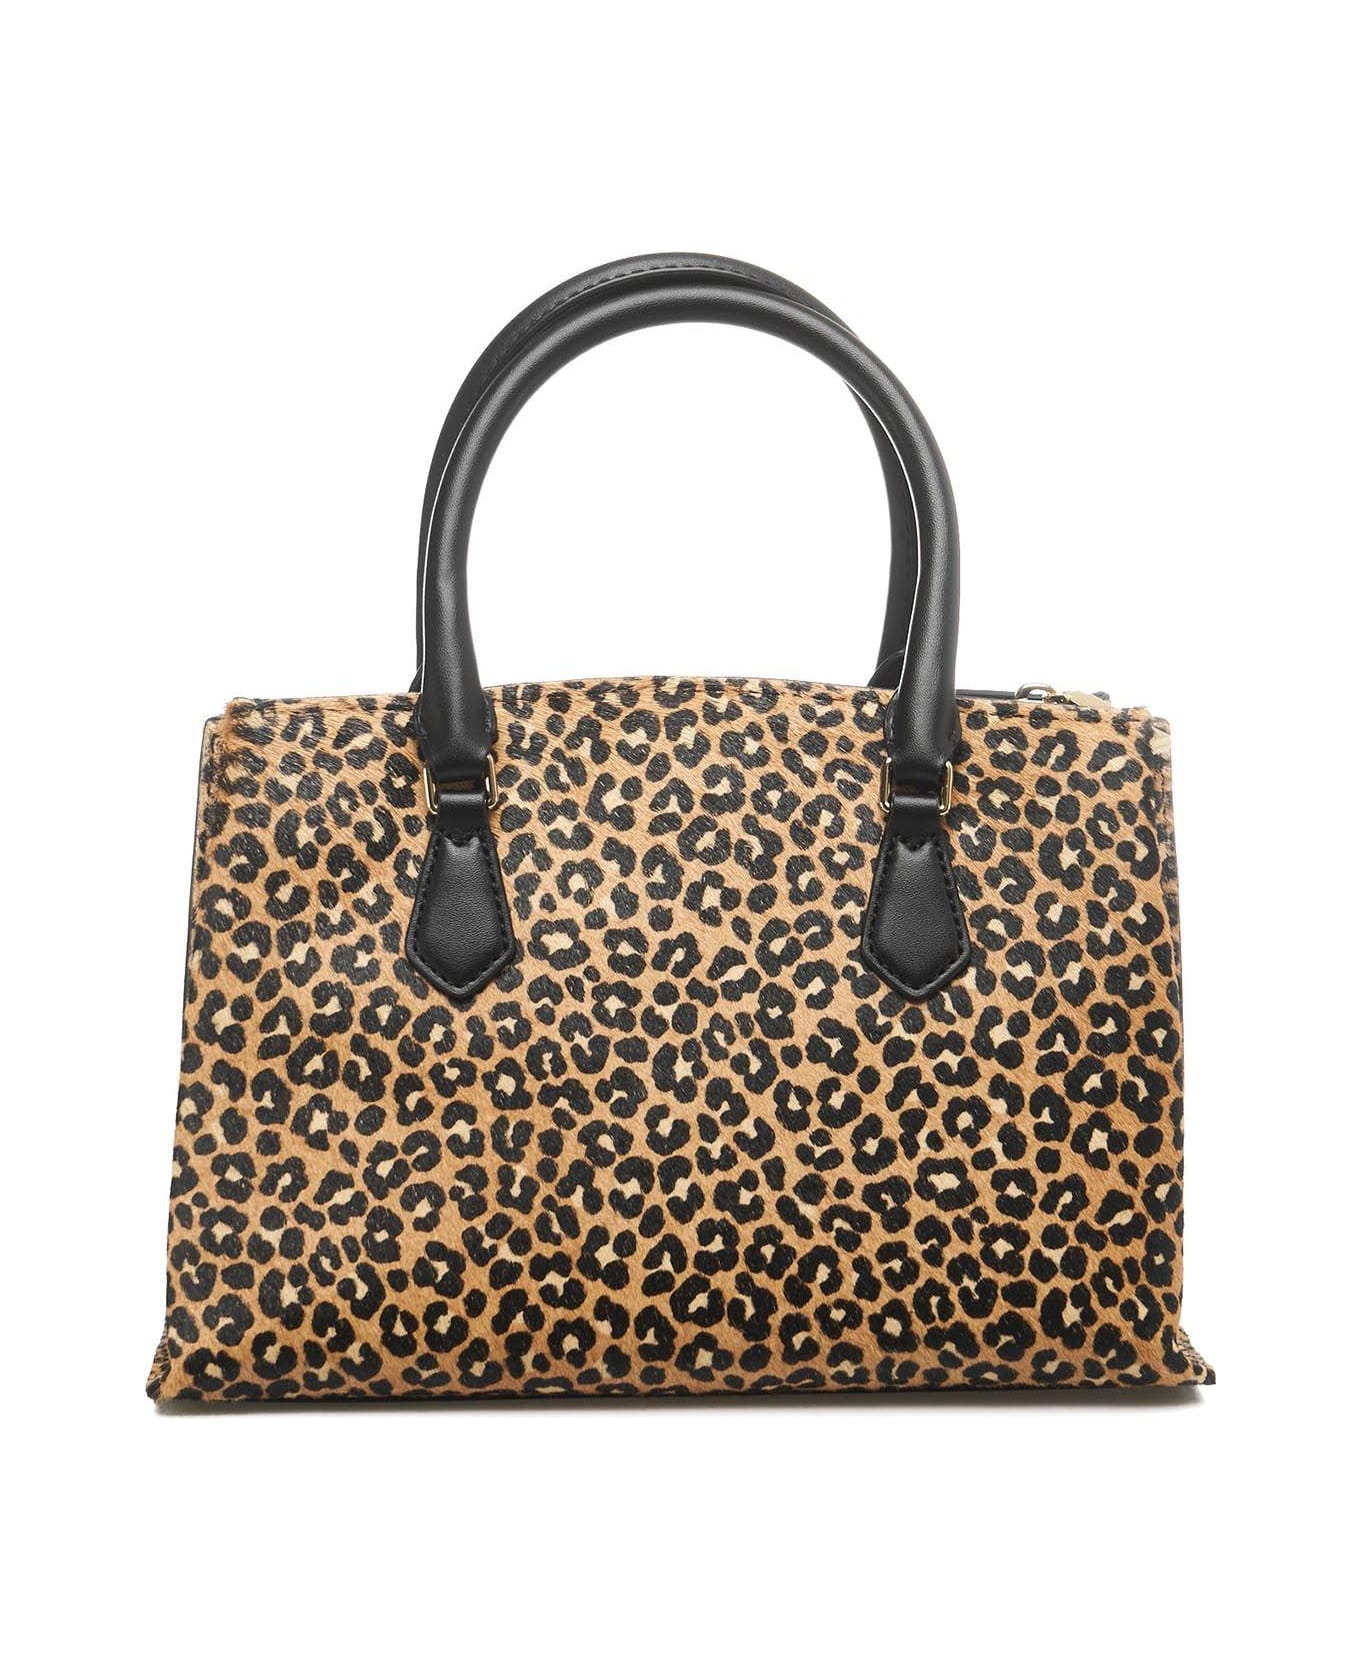 Michael Kors Collection Ruby Leopard Printed Small Tote Bag - Black Multi トートバッグ